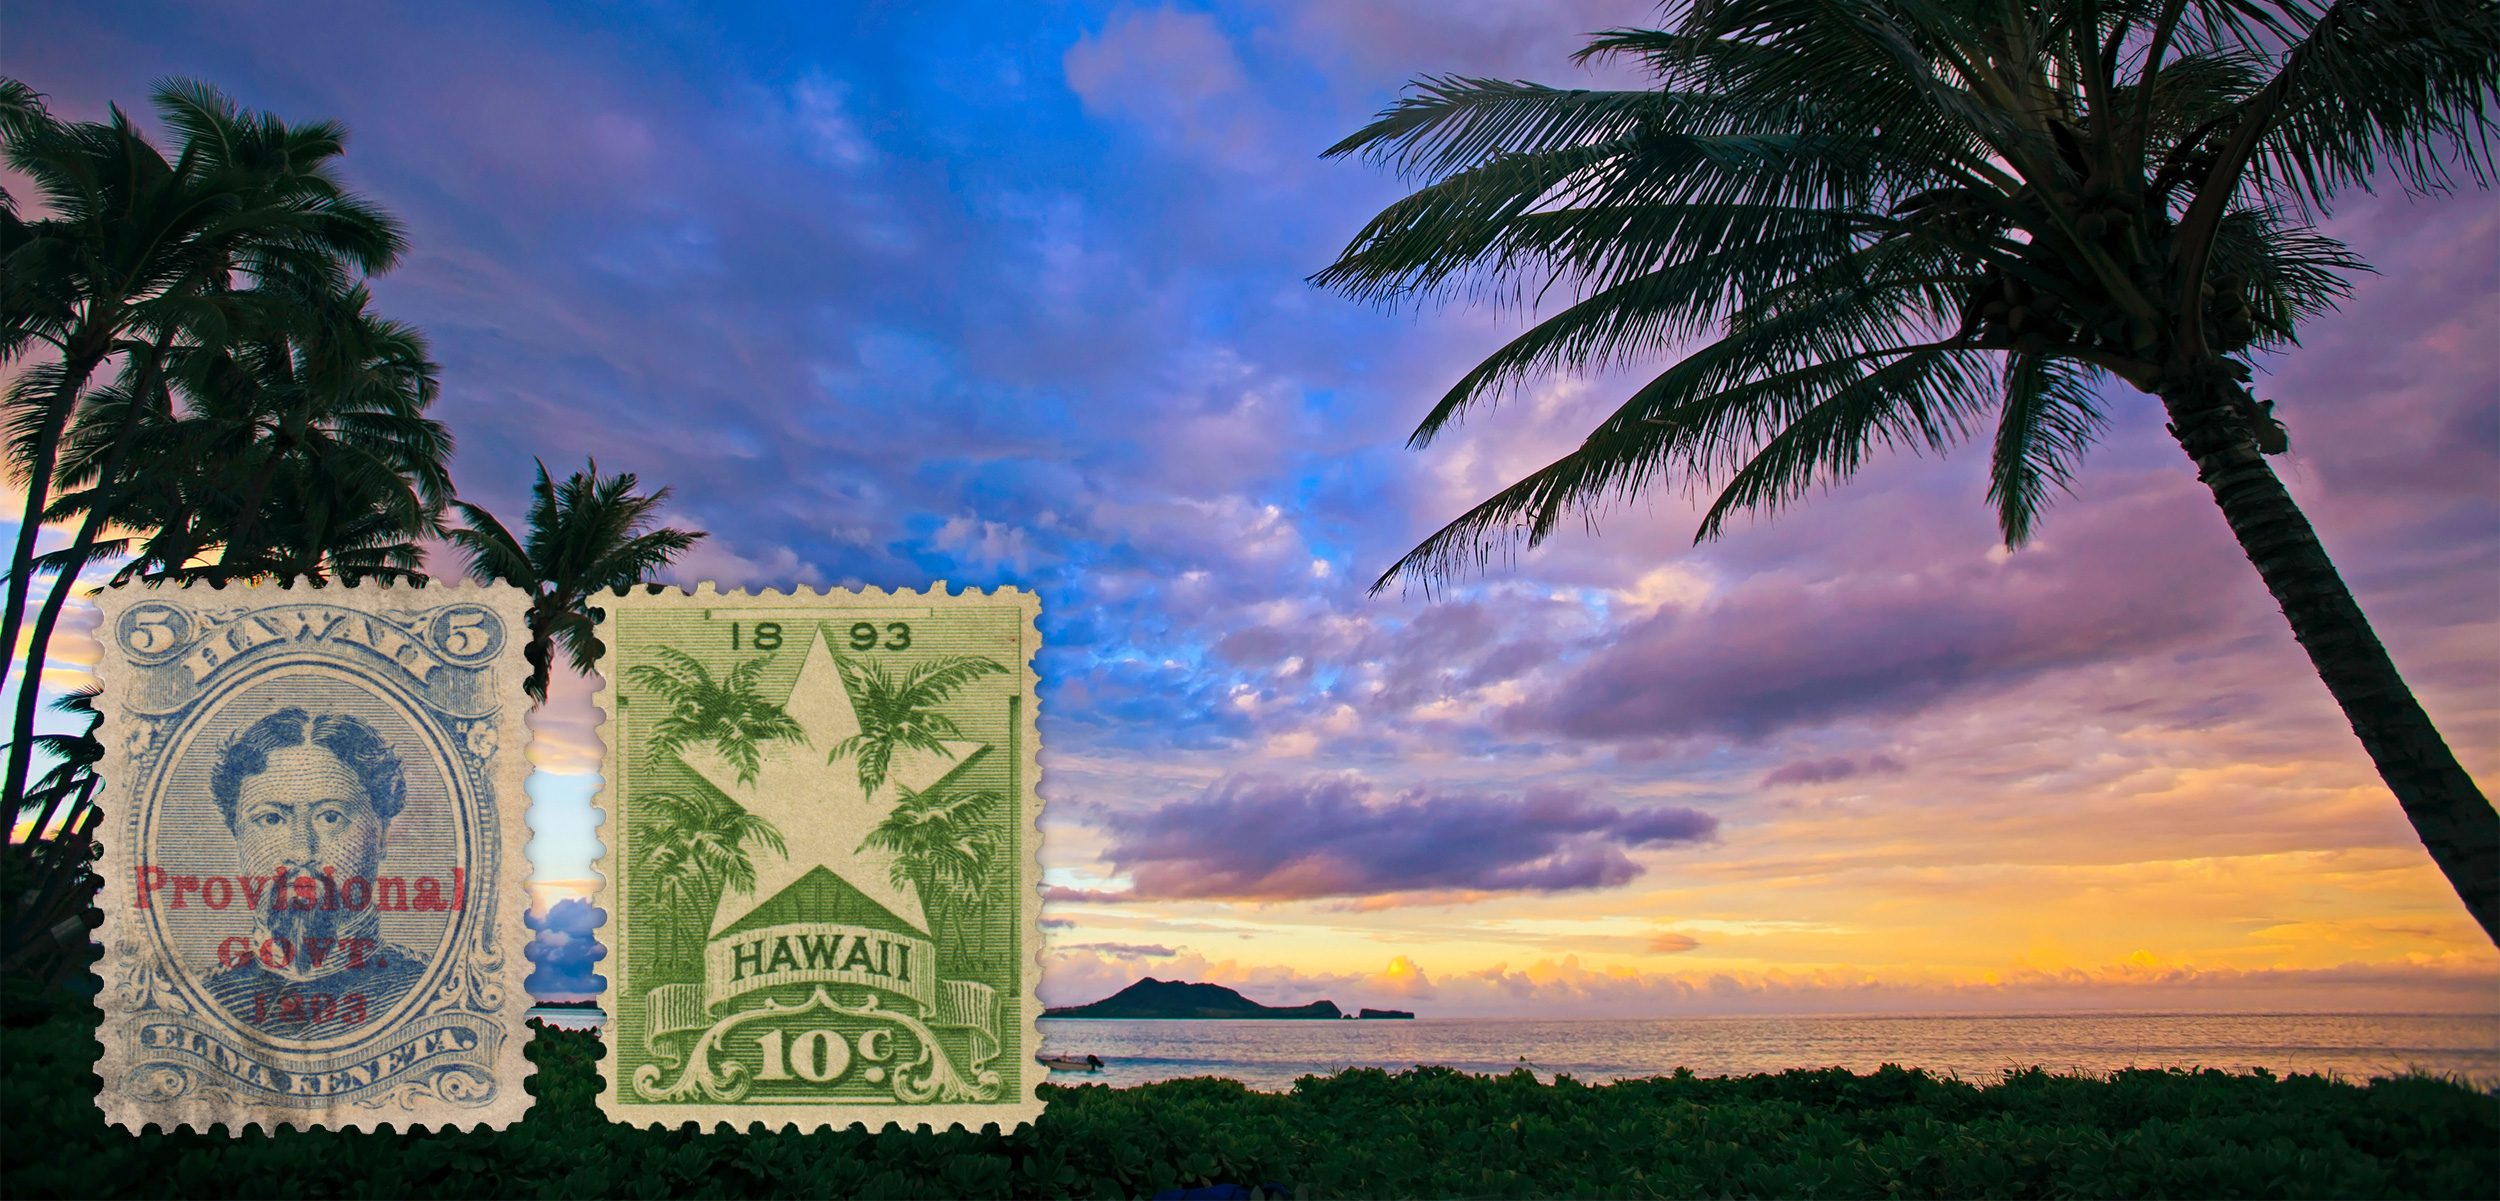 When the Provisional Government pushed its way into power in Hawai‘i in 1893, it stamped its name over the royal portraits that adorned existing postage stamps. The new government then ordered new stamps, including the star and palms, which is a visual statement of its desire to Americanize the once-independent kingdom. Background photo by Tomas del Amo/Alamy Stock Photo